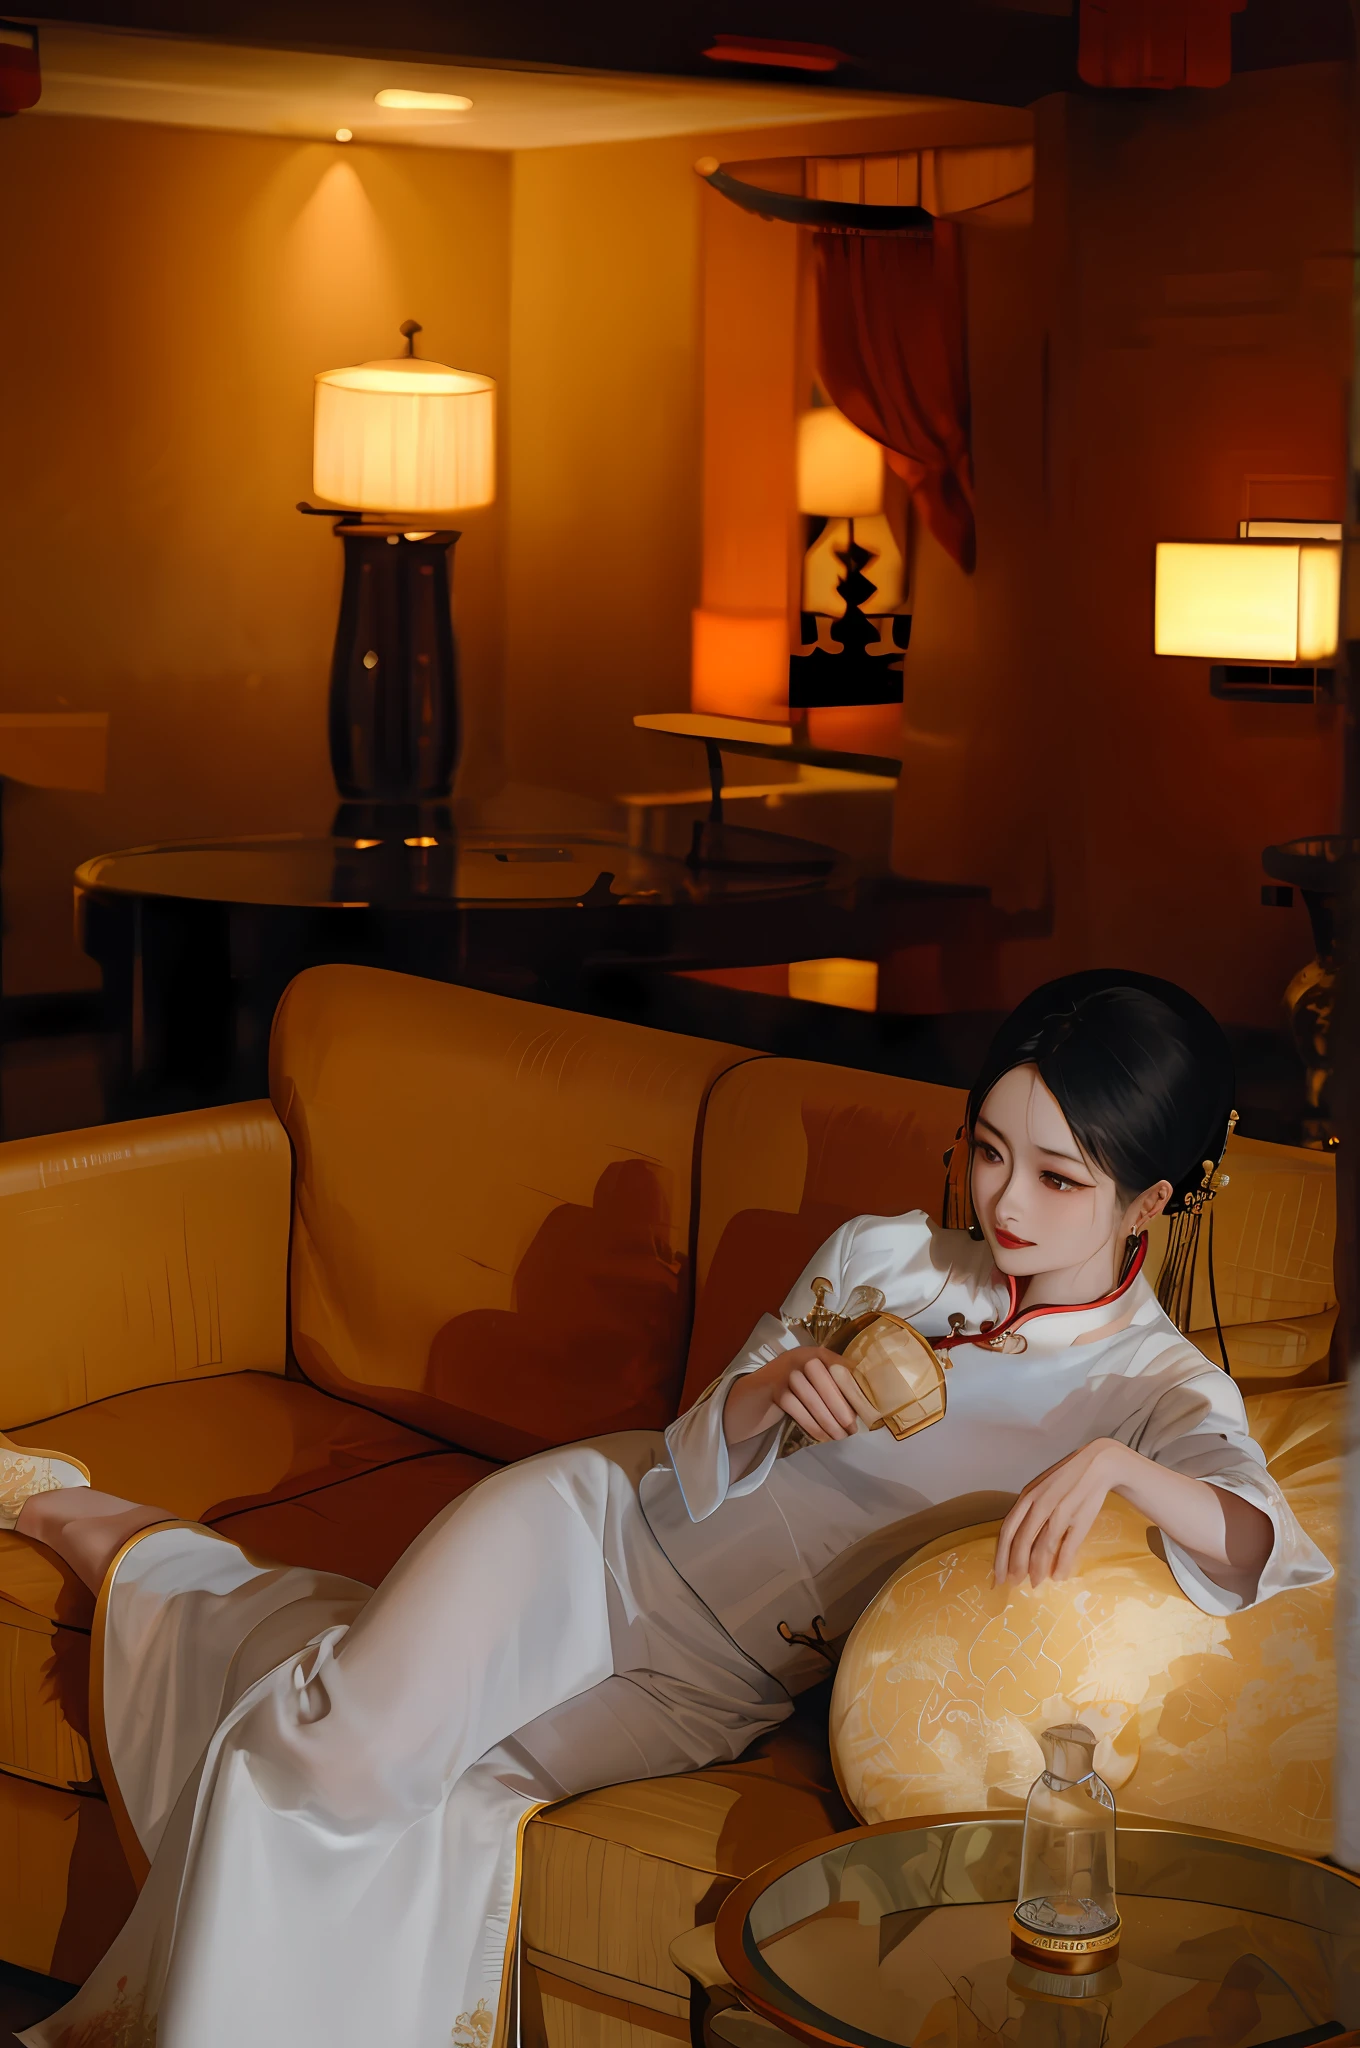 Woman in white dress lying on sofa in hotel room, Shaxi, inspired by Cheng Jiasui, inspired by Qian Du, inspired by Zhang Shuqi, Chen Lulu, inspired by Wang Lu, inspired by Wang Guxiang, Ao Dai, inspired by Gu An, inspired by Liu Haisu, inspired by Wang Meng, inspired by Jiang Tingxi, perfect facial details, perfect hand details. Chinese style in the background